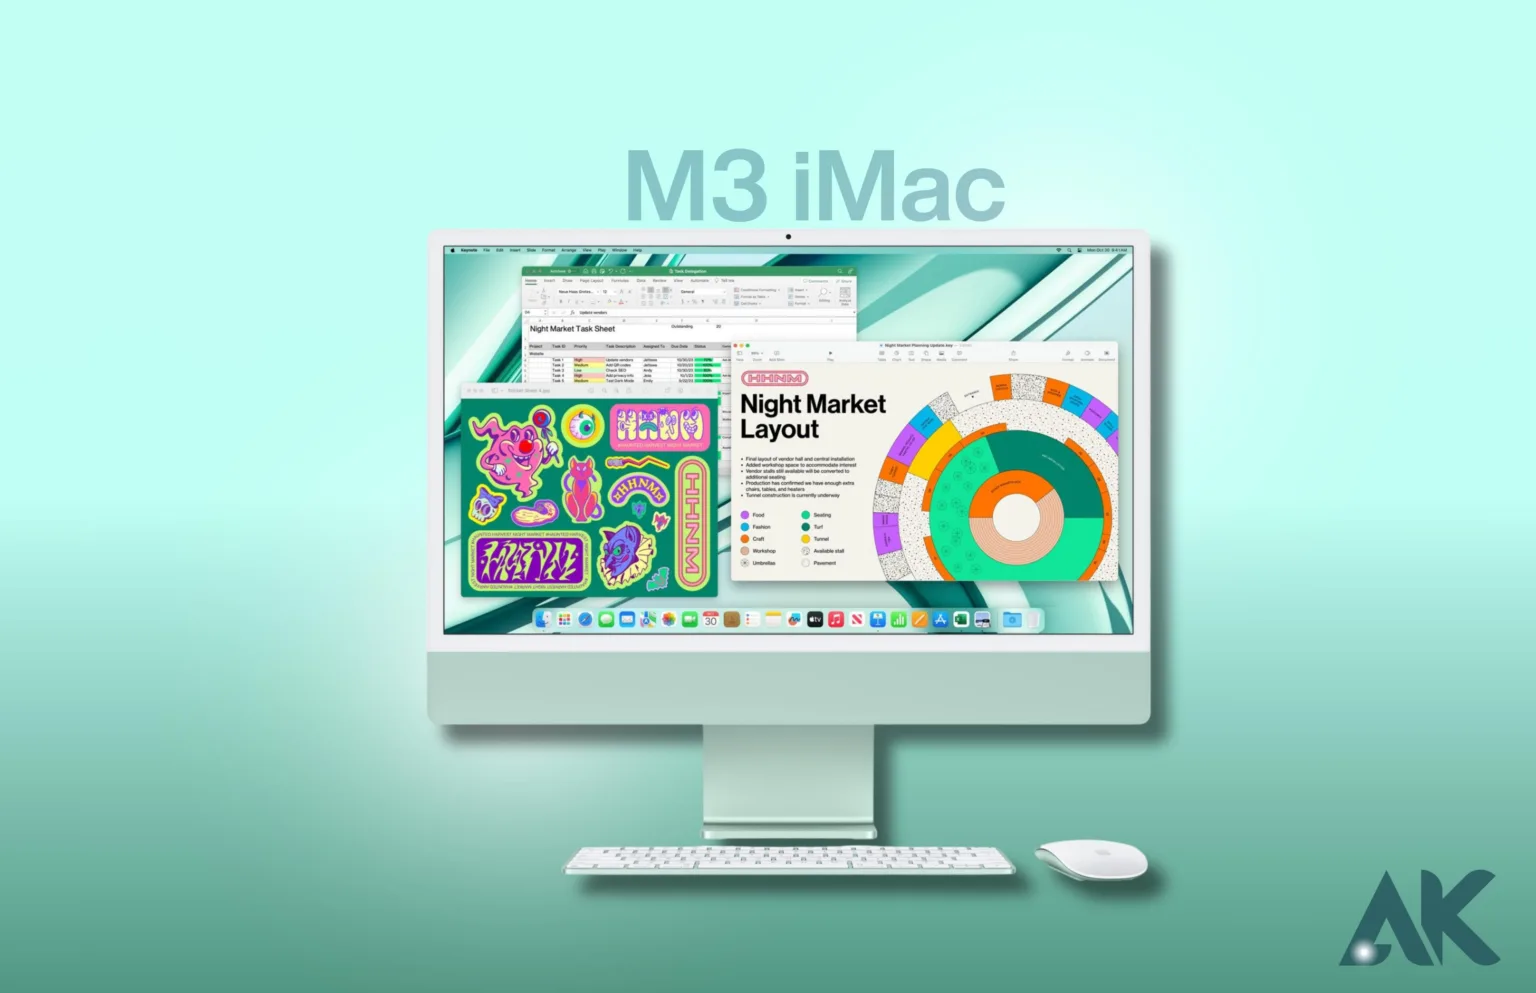 M3 iMac: Everything You Need to Know About Apple's Next-Generation All-in-One Desktop